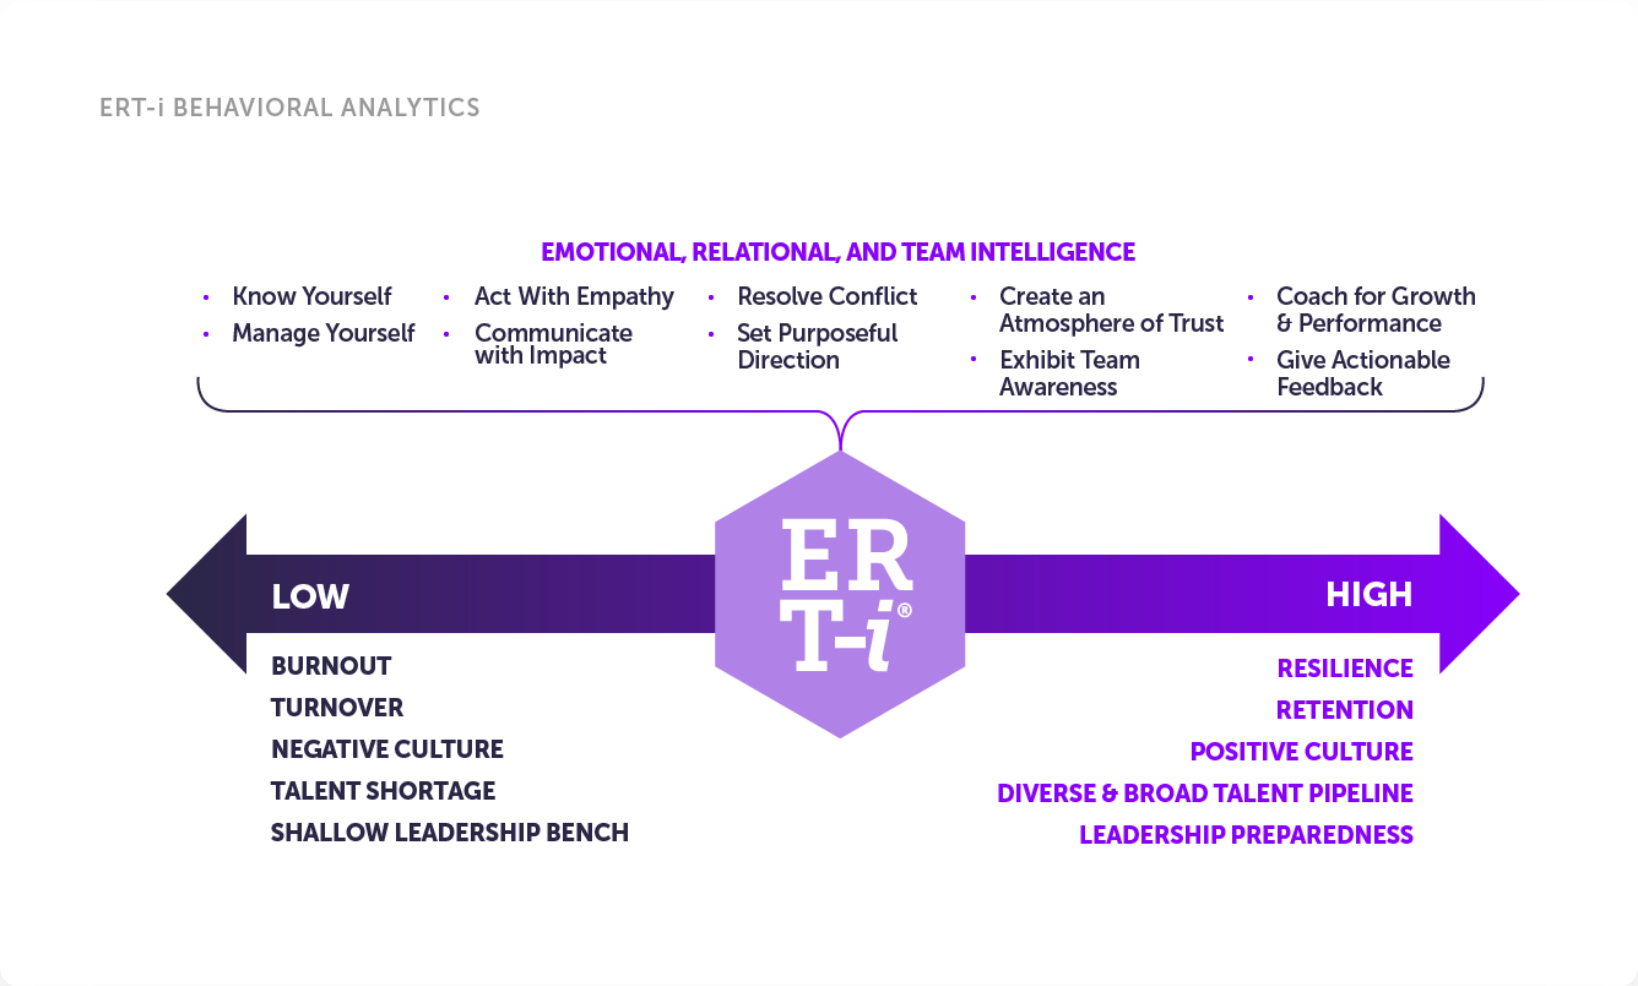 how emotional, relational, and team intelligence works